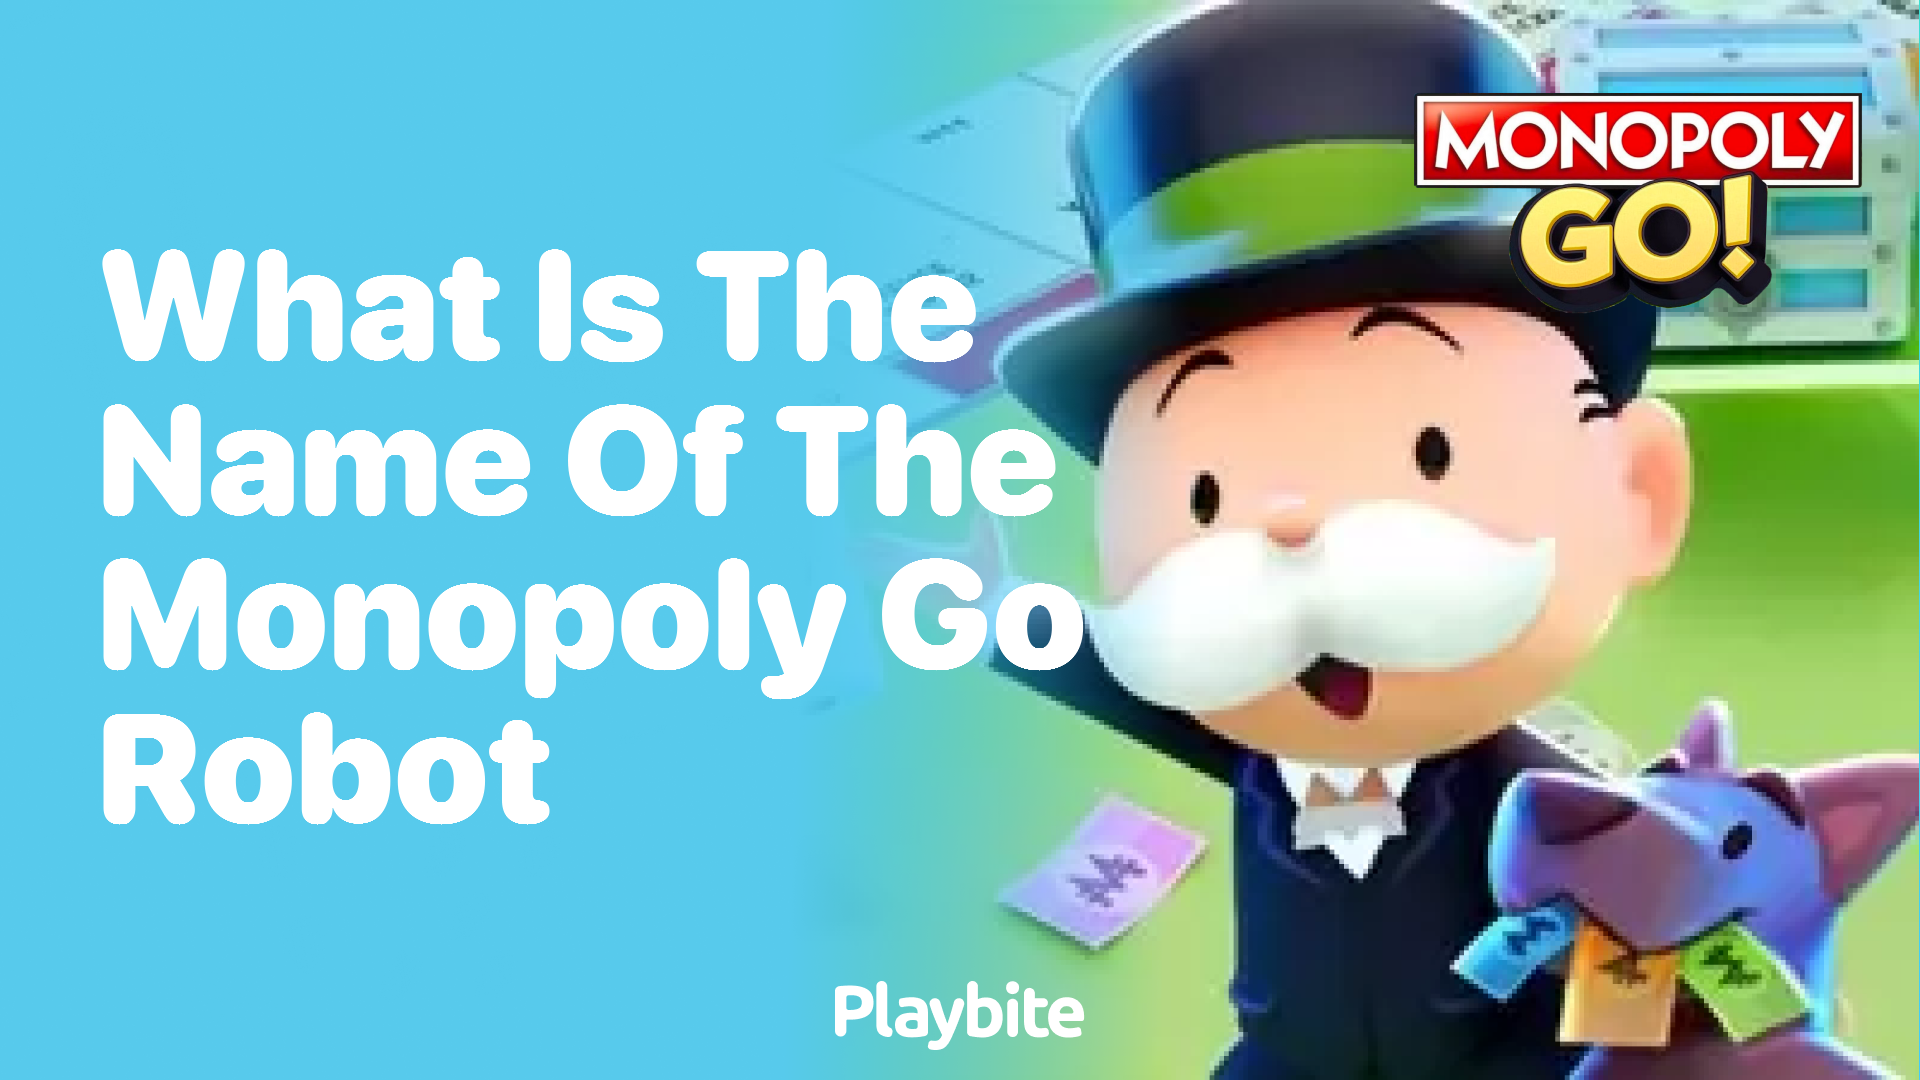 What Is the Name of the Monopoly Go Robot?